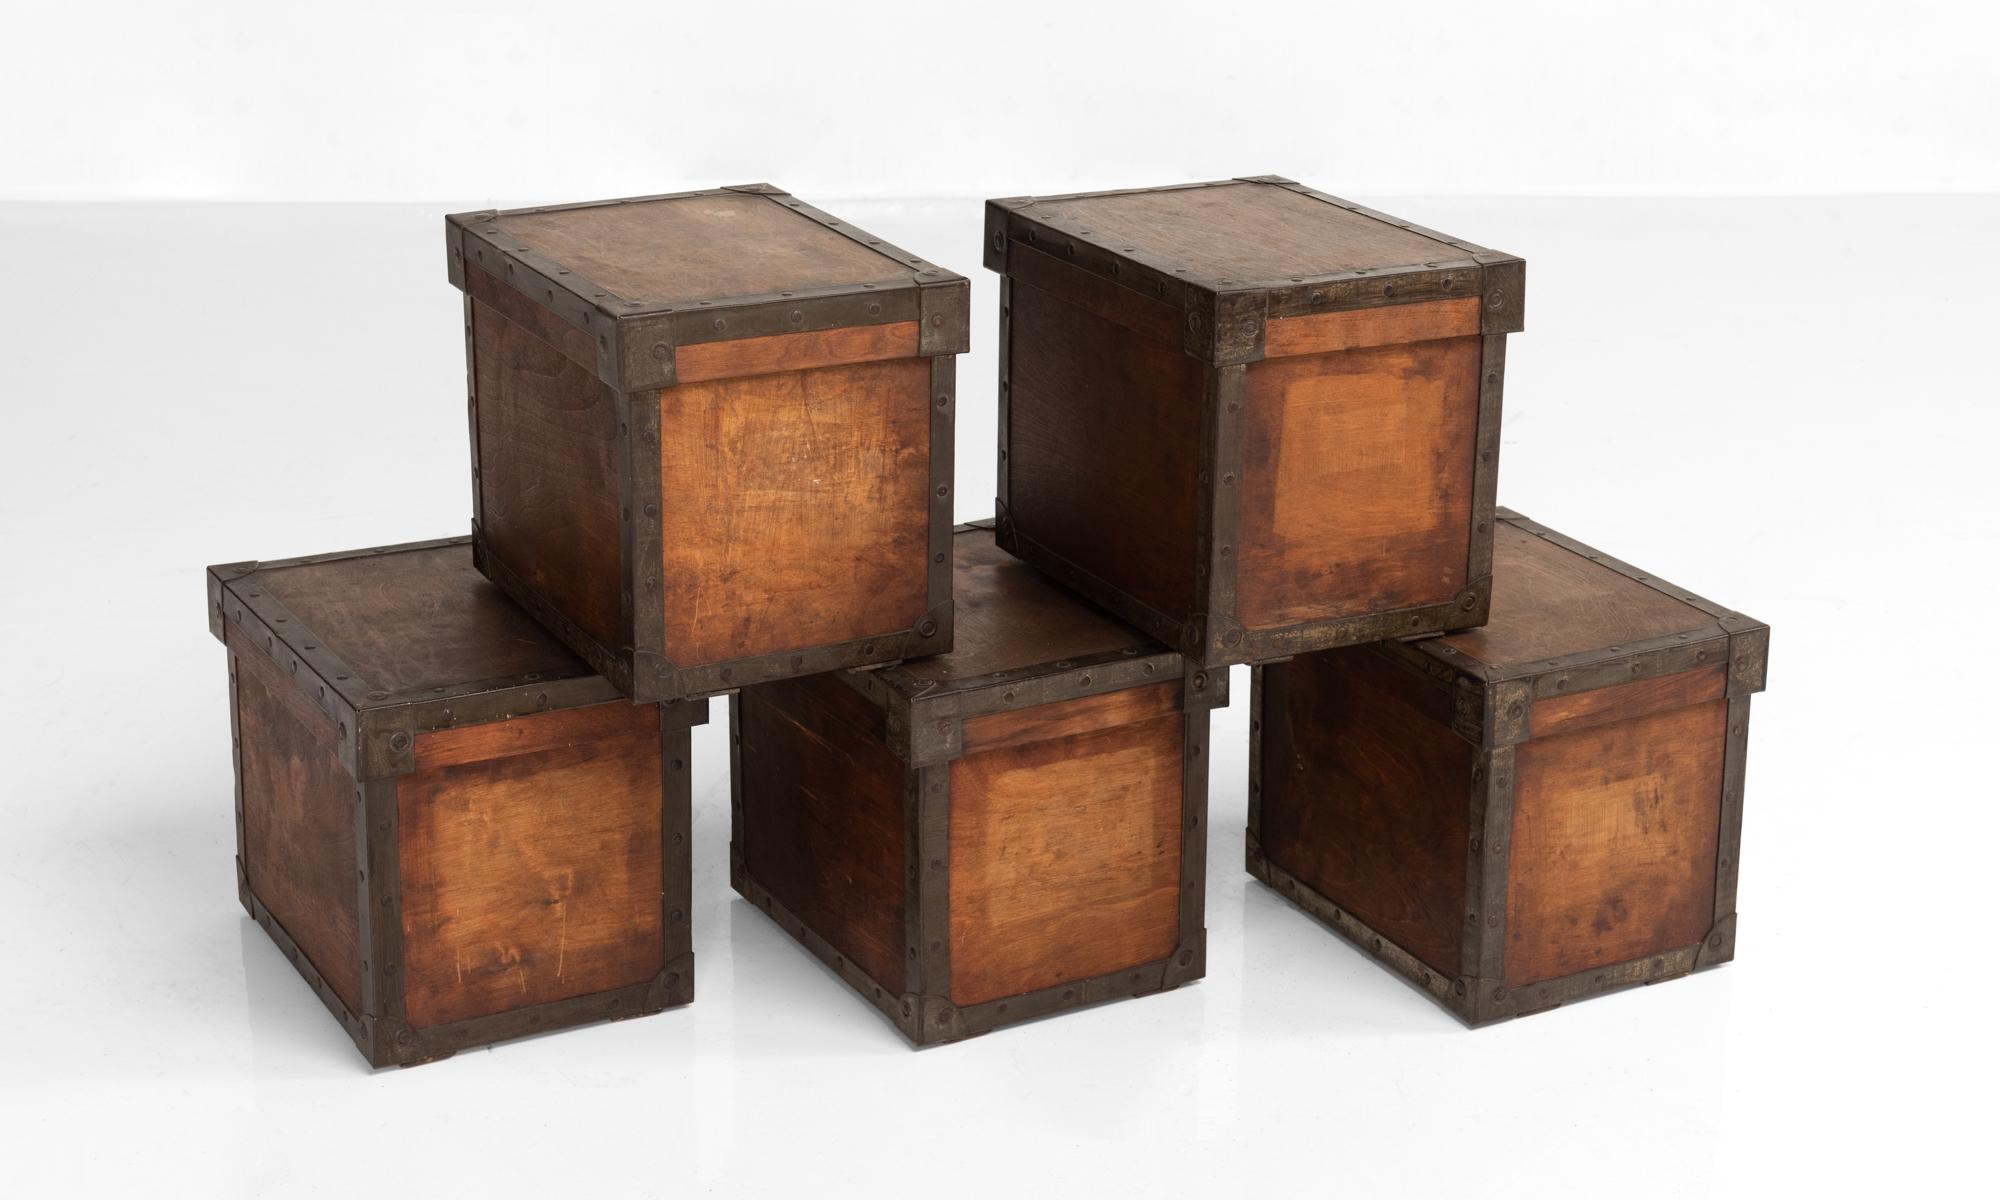 Wooden storage box with metal edges, England, circa 1930.

Wooden boxes with wooden lids and protective metal edges.